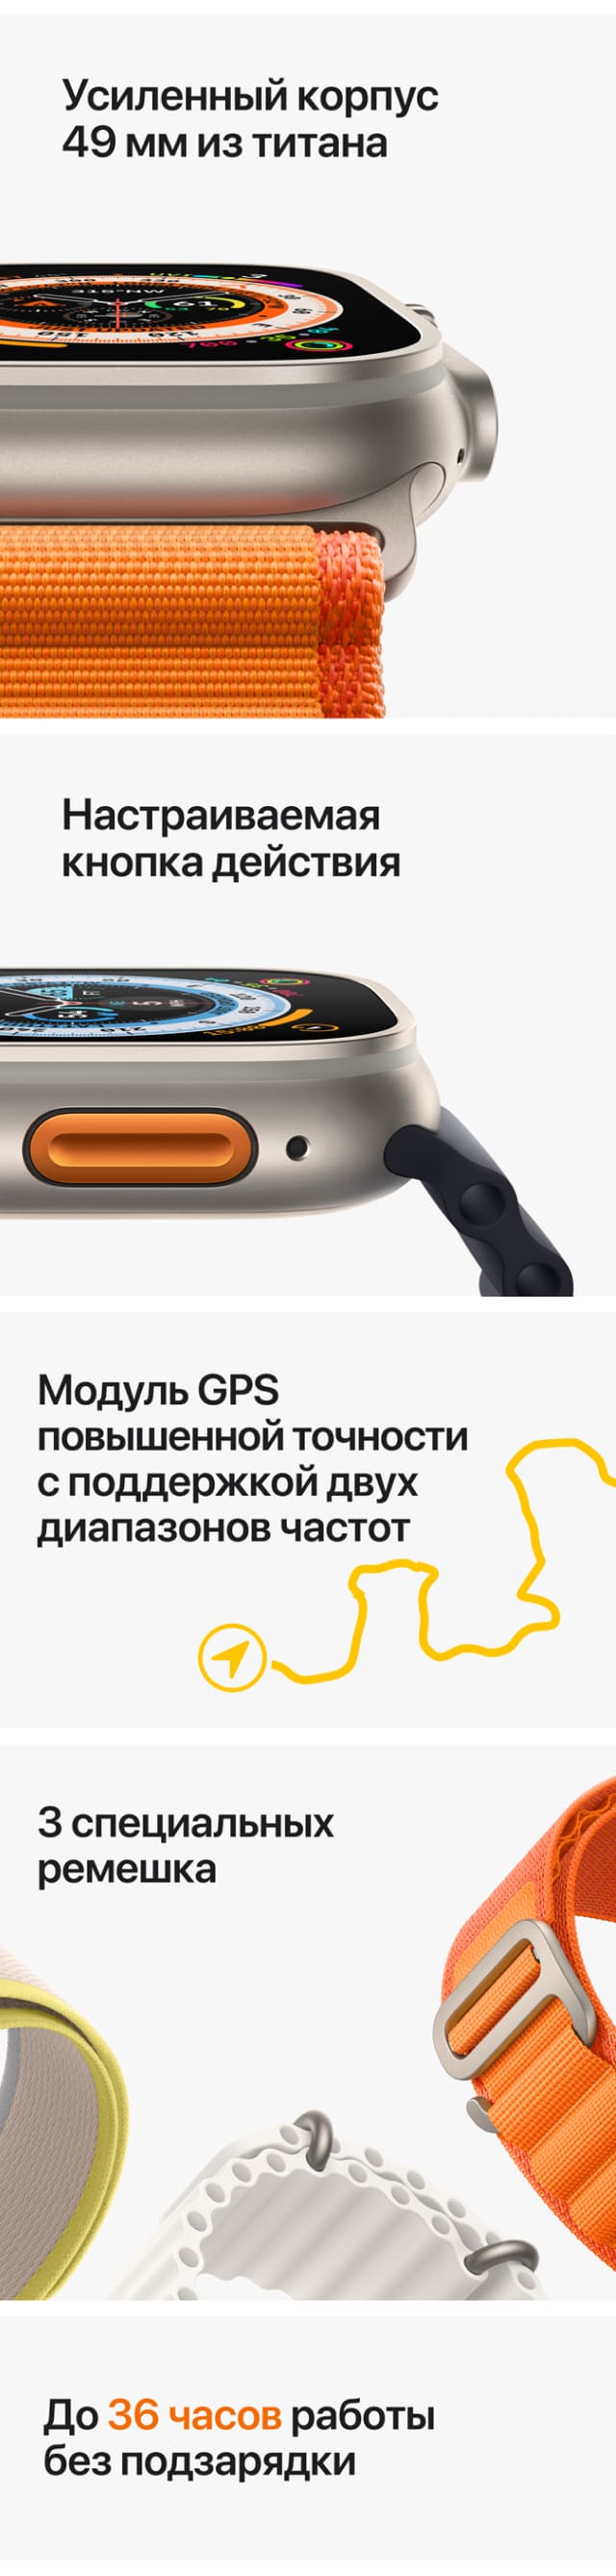 watch features image